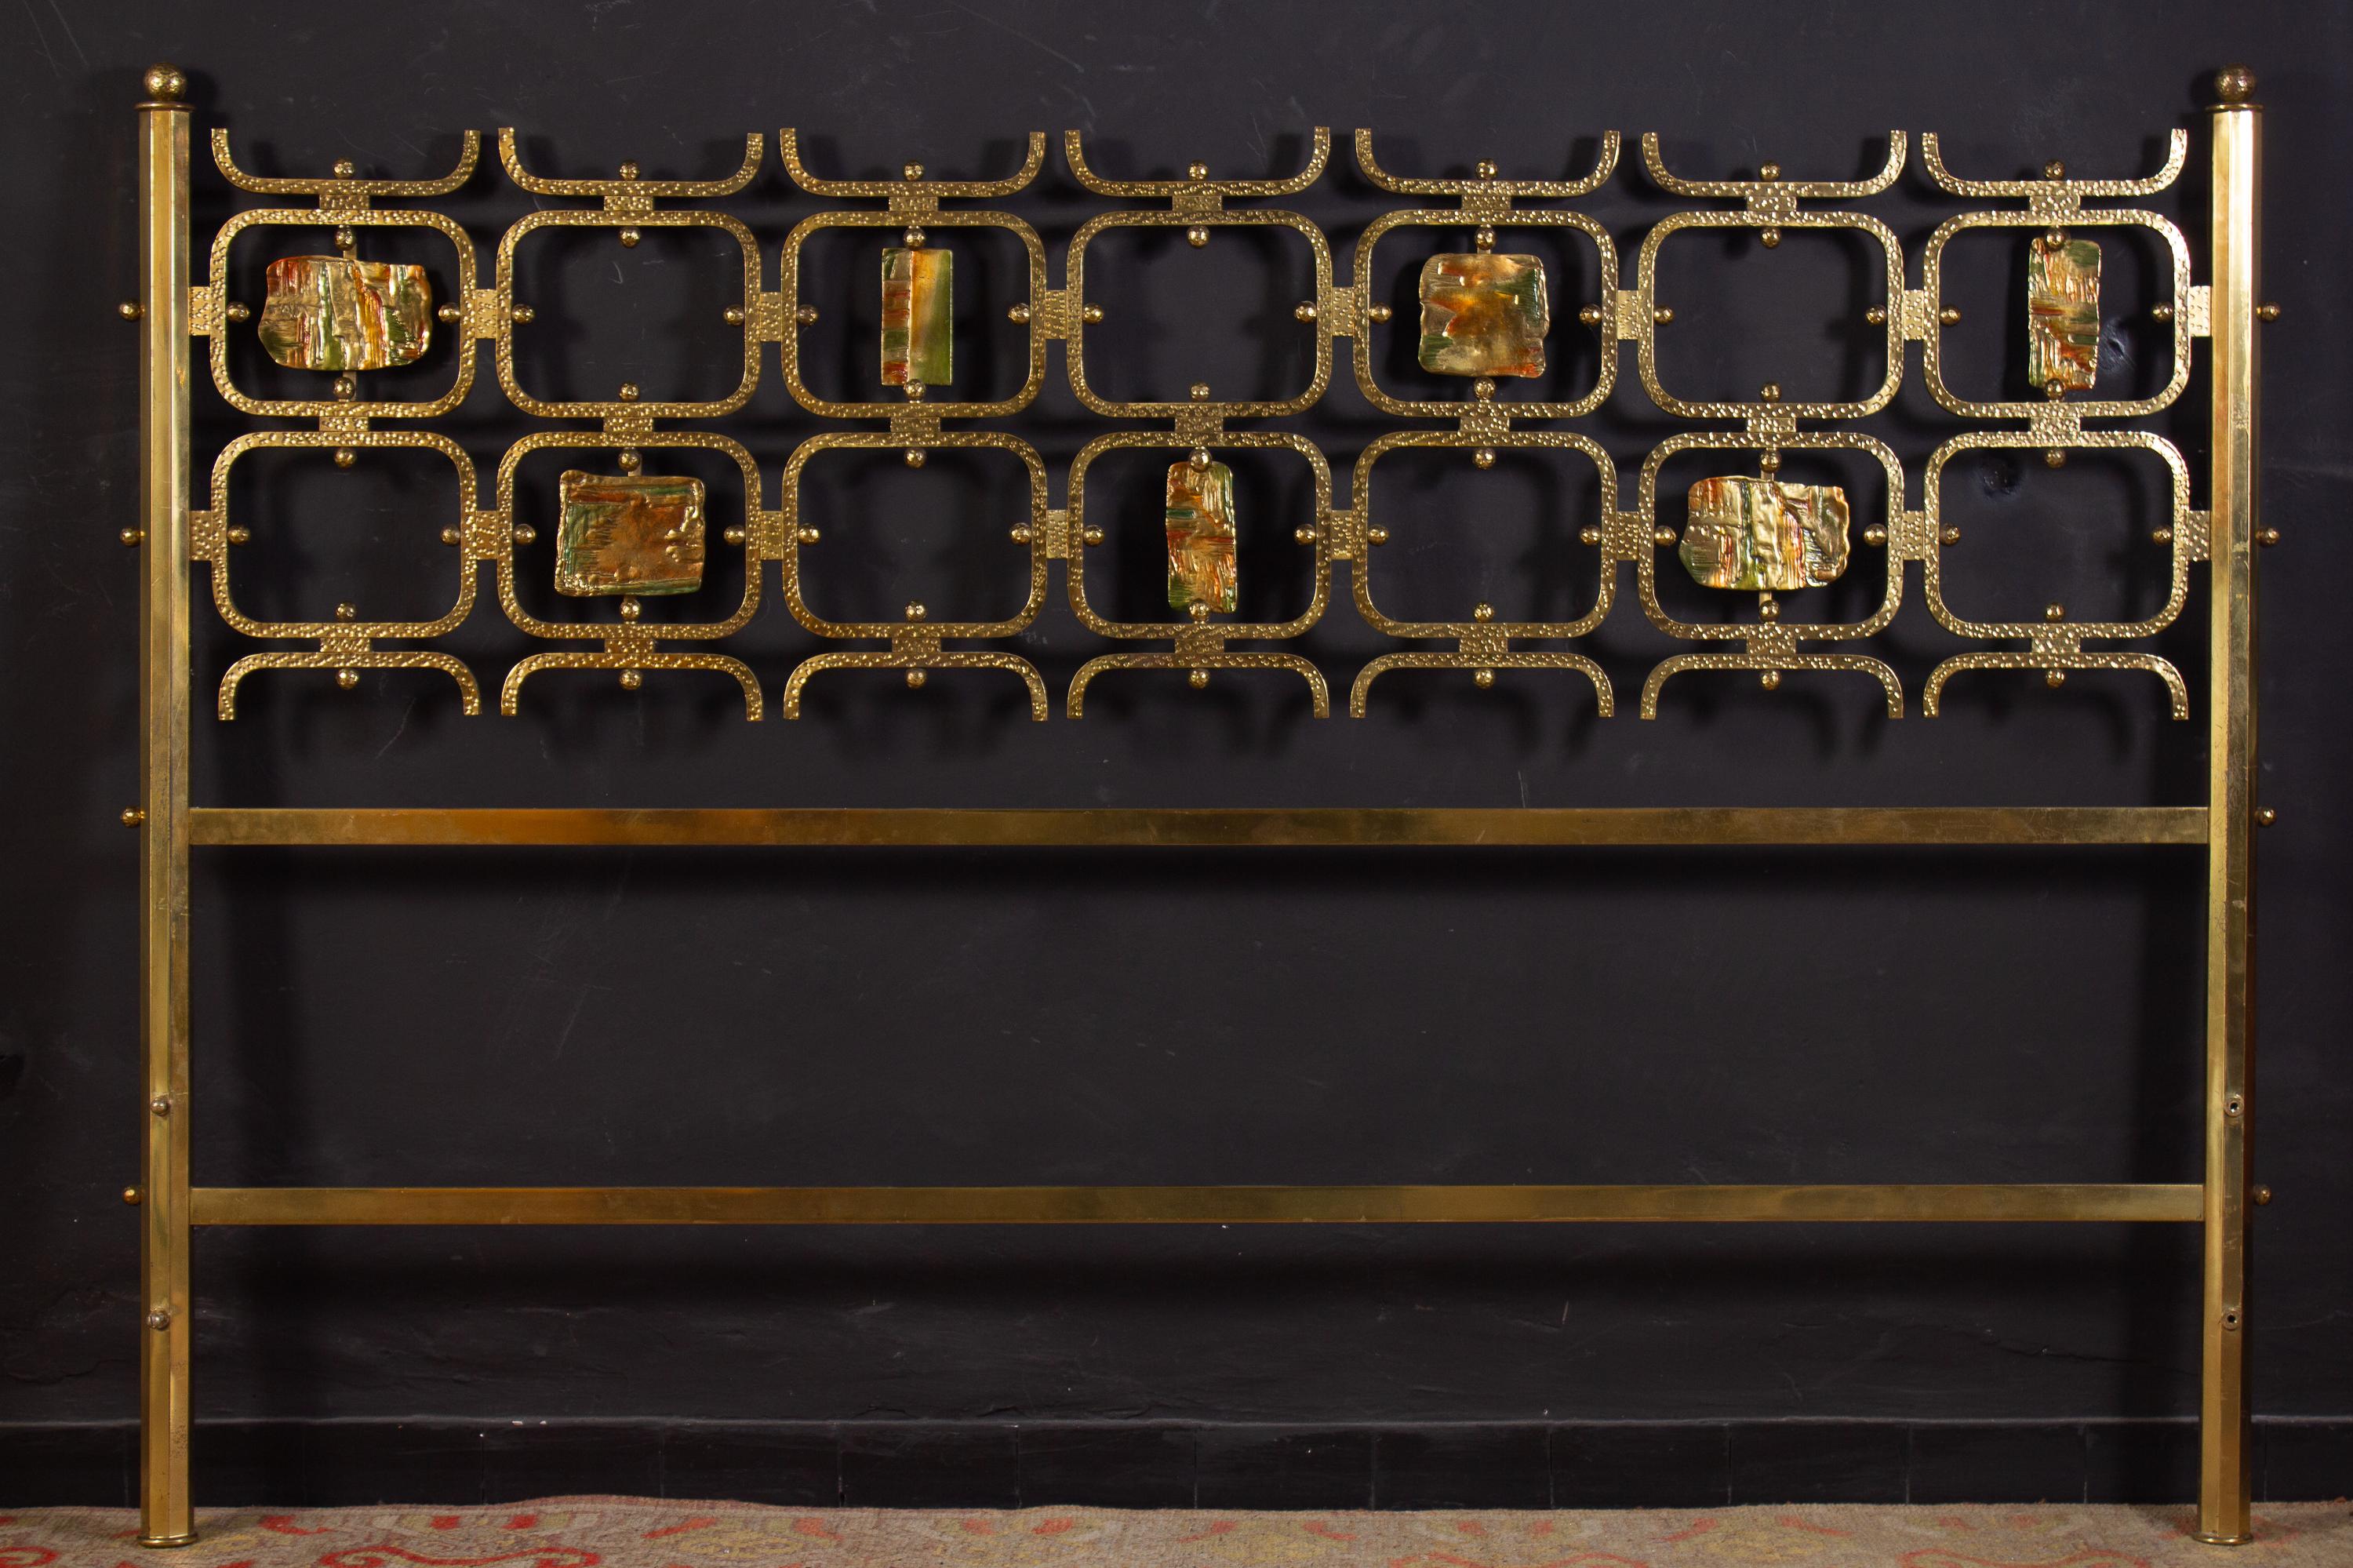 Important brass bed frame from the Italian designer, Osvaldo Borsani and sculptor, Arnaldo Pomodoro.
A fine piece of midcentury Italian bedroom furniture that will look fabulous in any home.
Produced circa 1958, the principal structure of the bed,